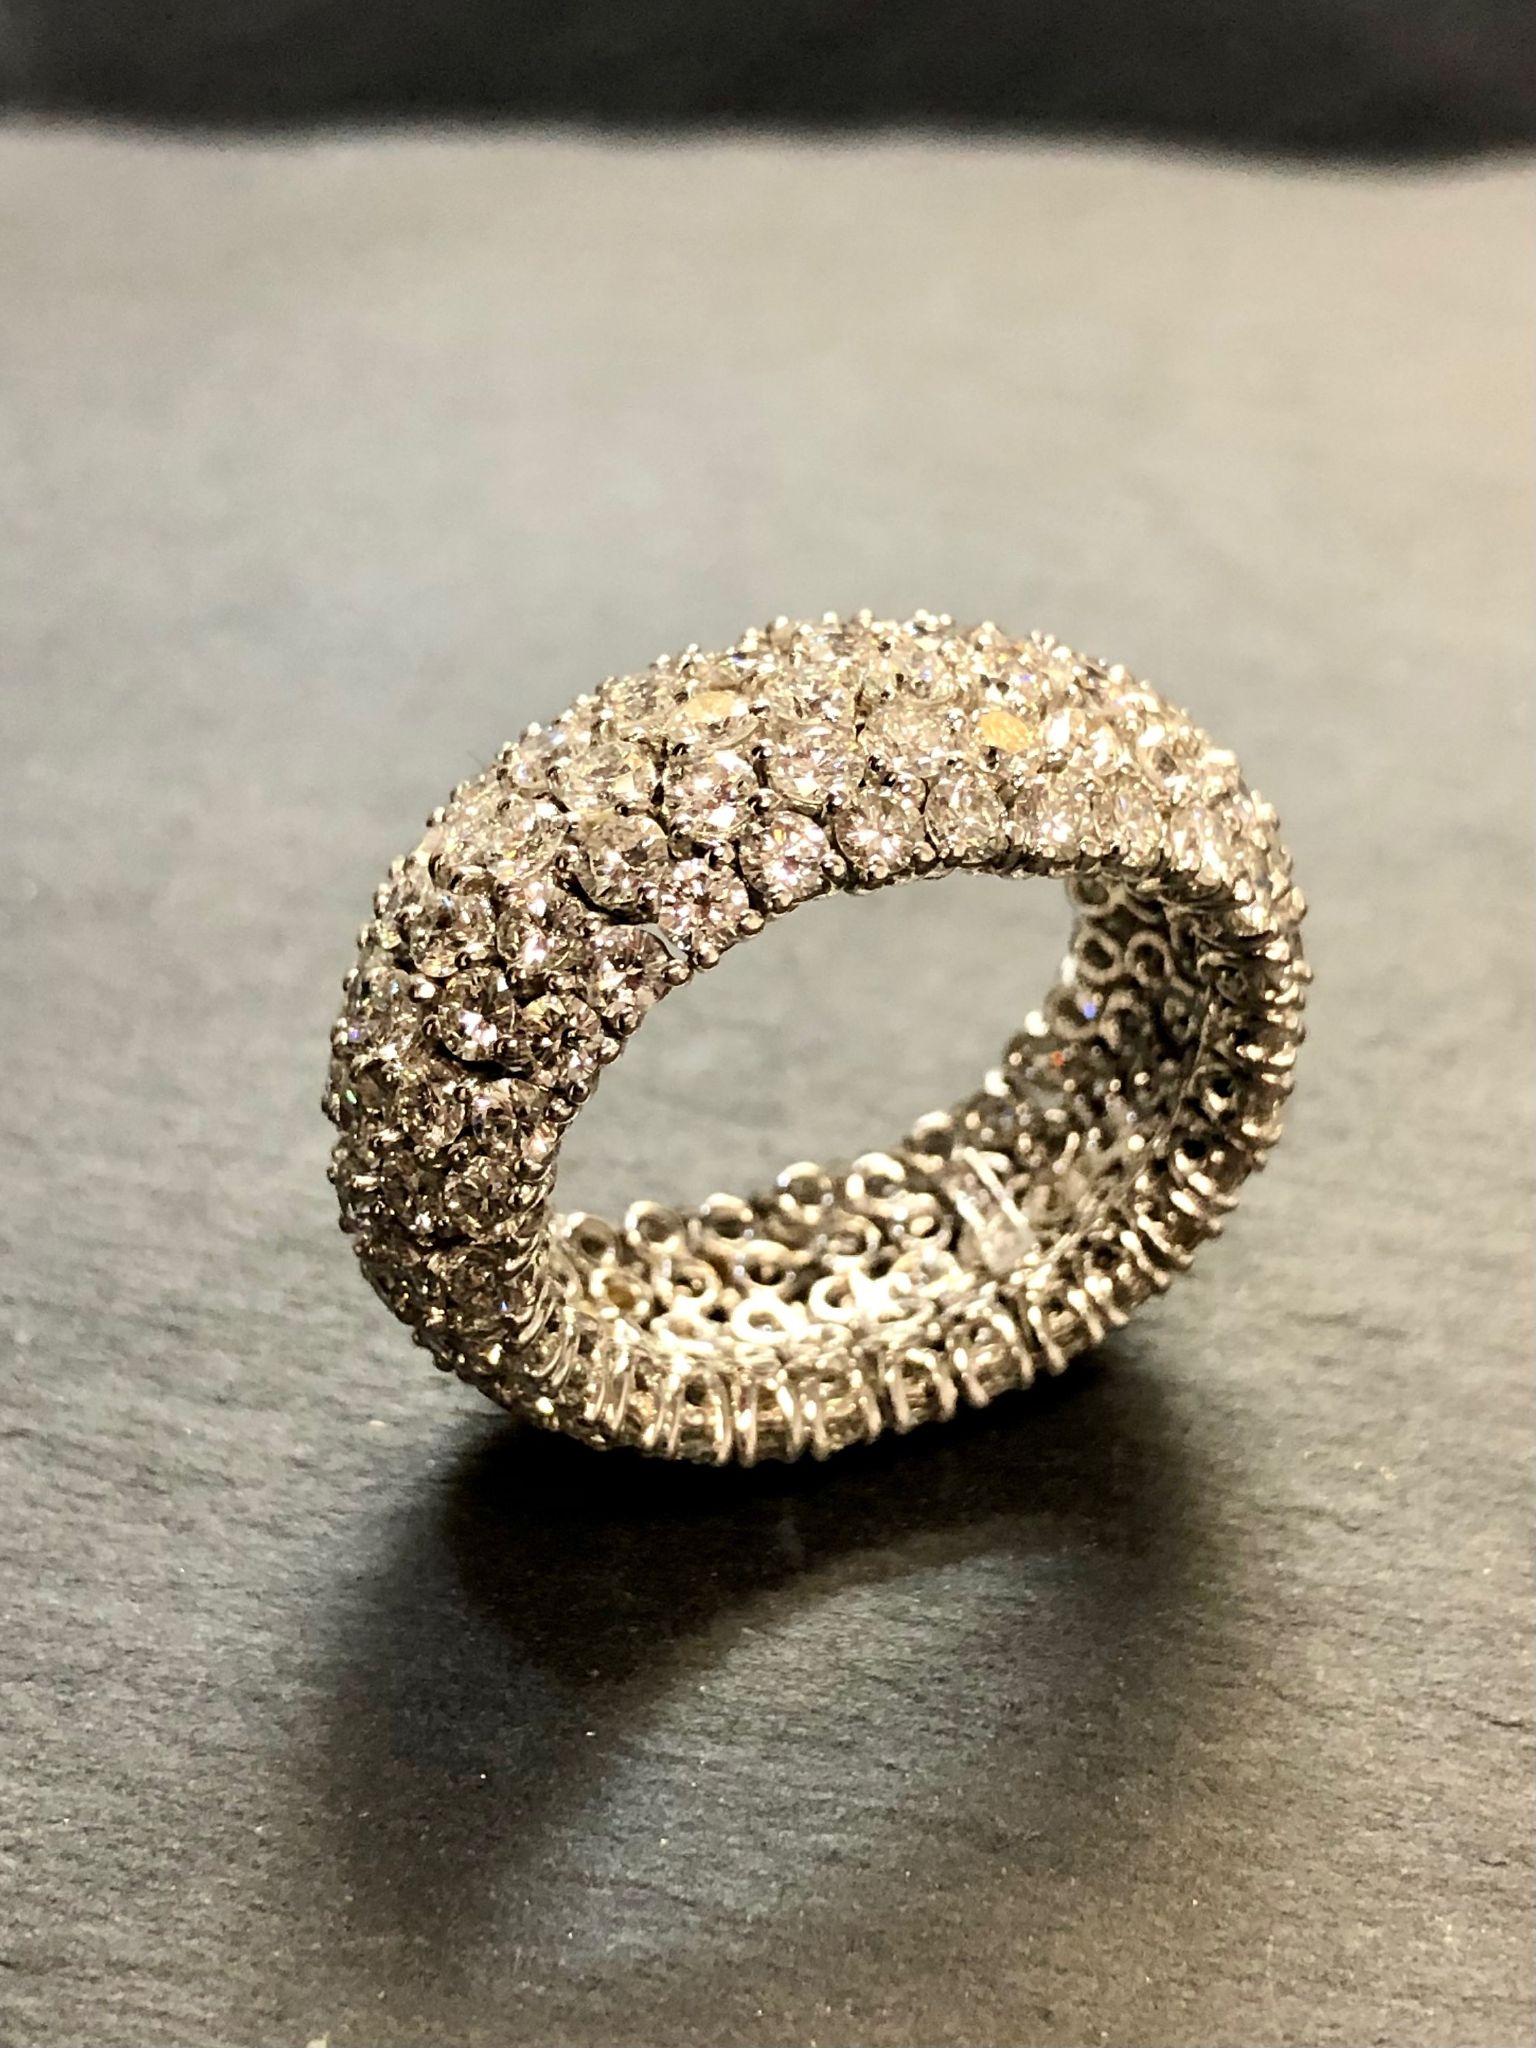 A beautifully made flexible wide band done in 18K and individually prong set with approximately 7cttw in H-J color Vs1-Si1 clarity round diamonds.

Dimensions /Weight
10.50mm wide. Size 6. Weighs 6.4dwt.

Condition
All stones are secure. Perfectly